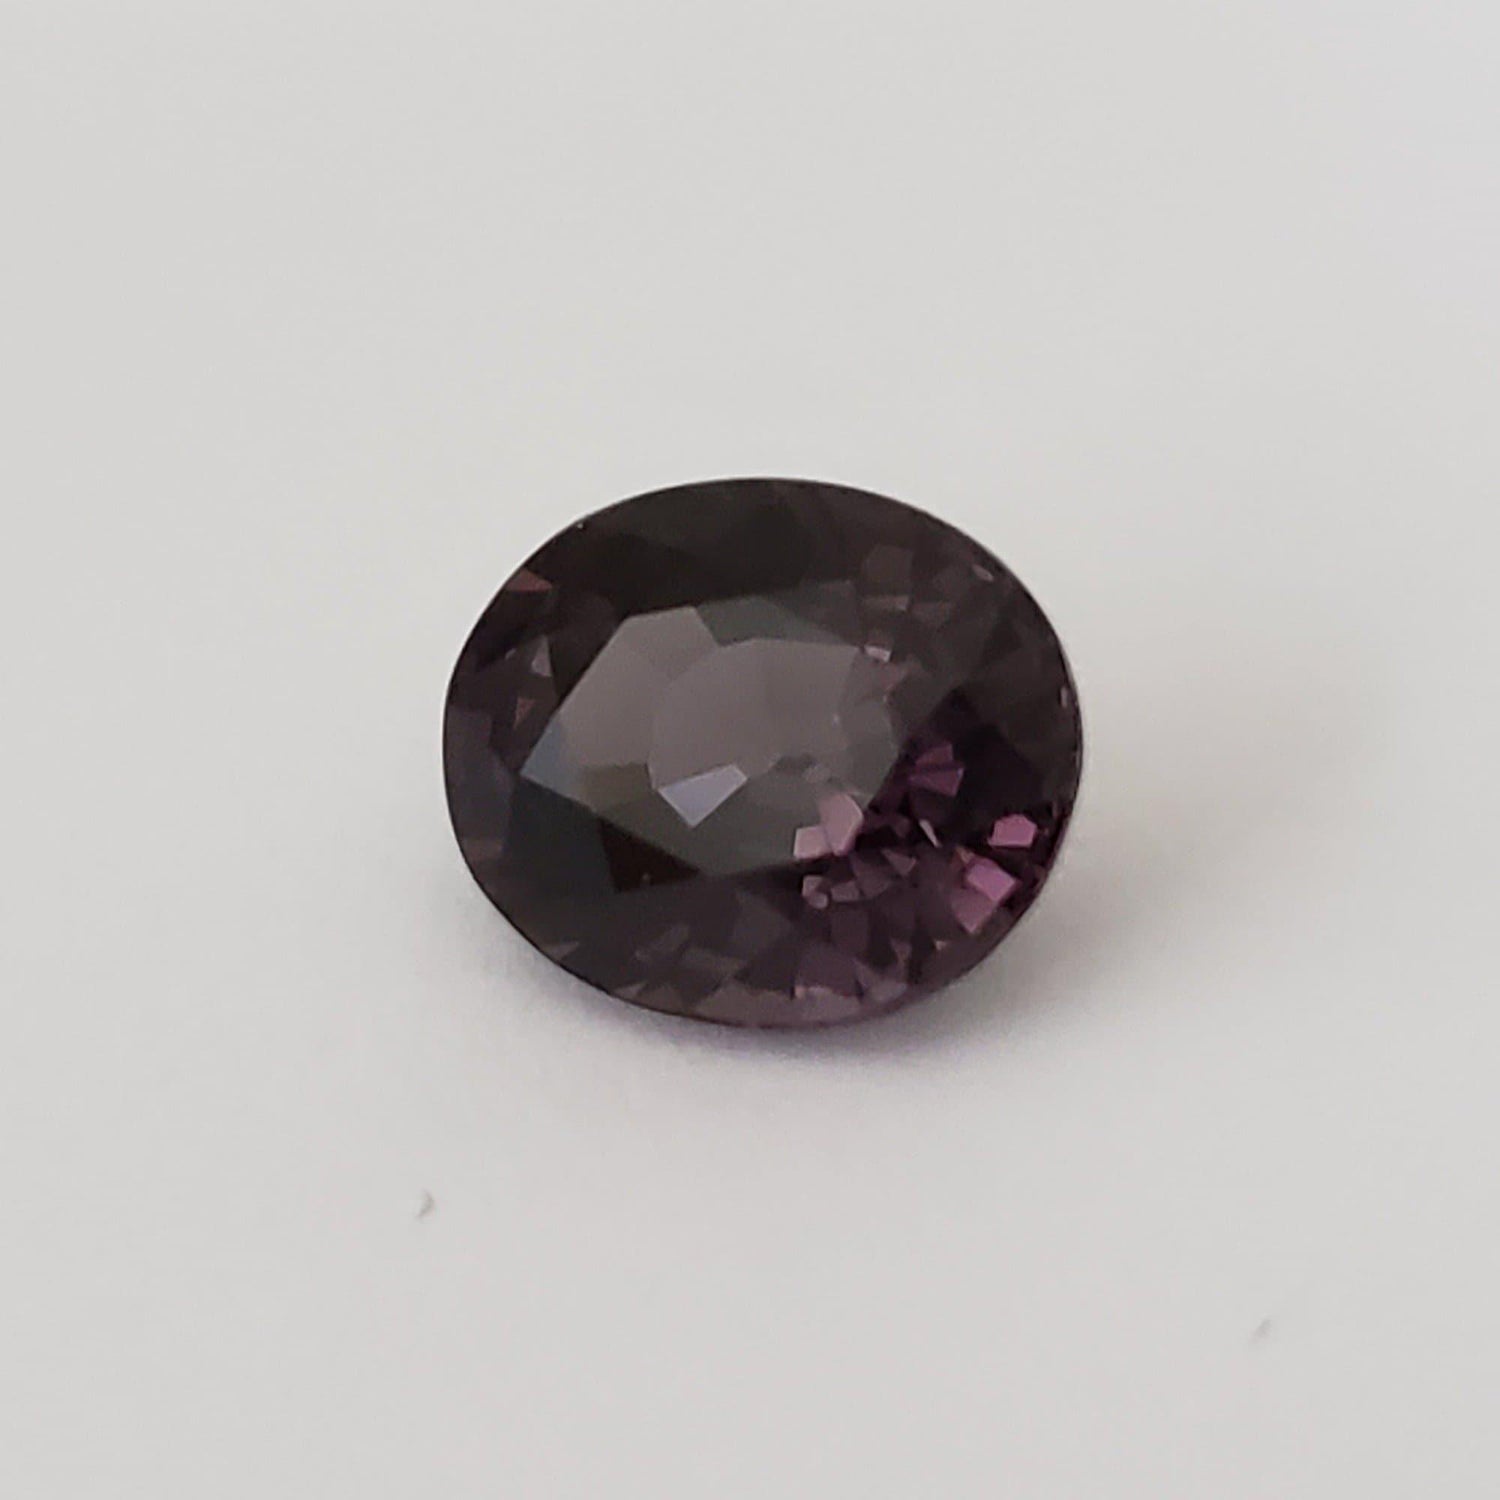 Spinel | Oval Cut | Lavender Pink | Natural | 9.1x7.7mm 2.84ct